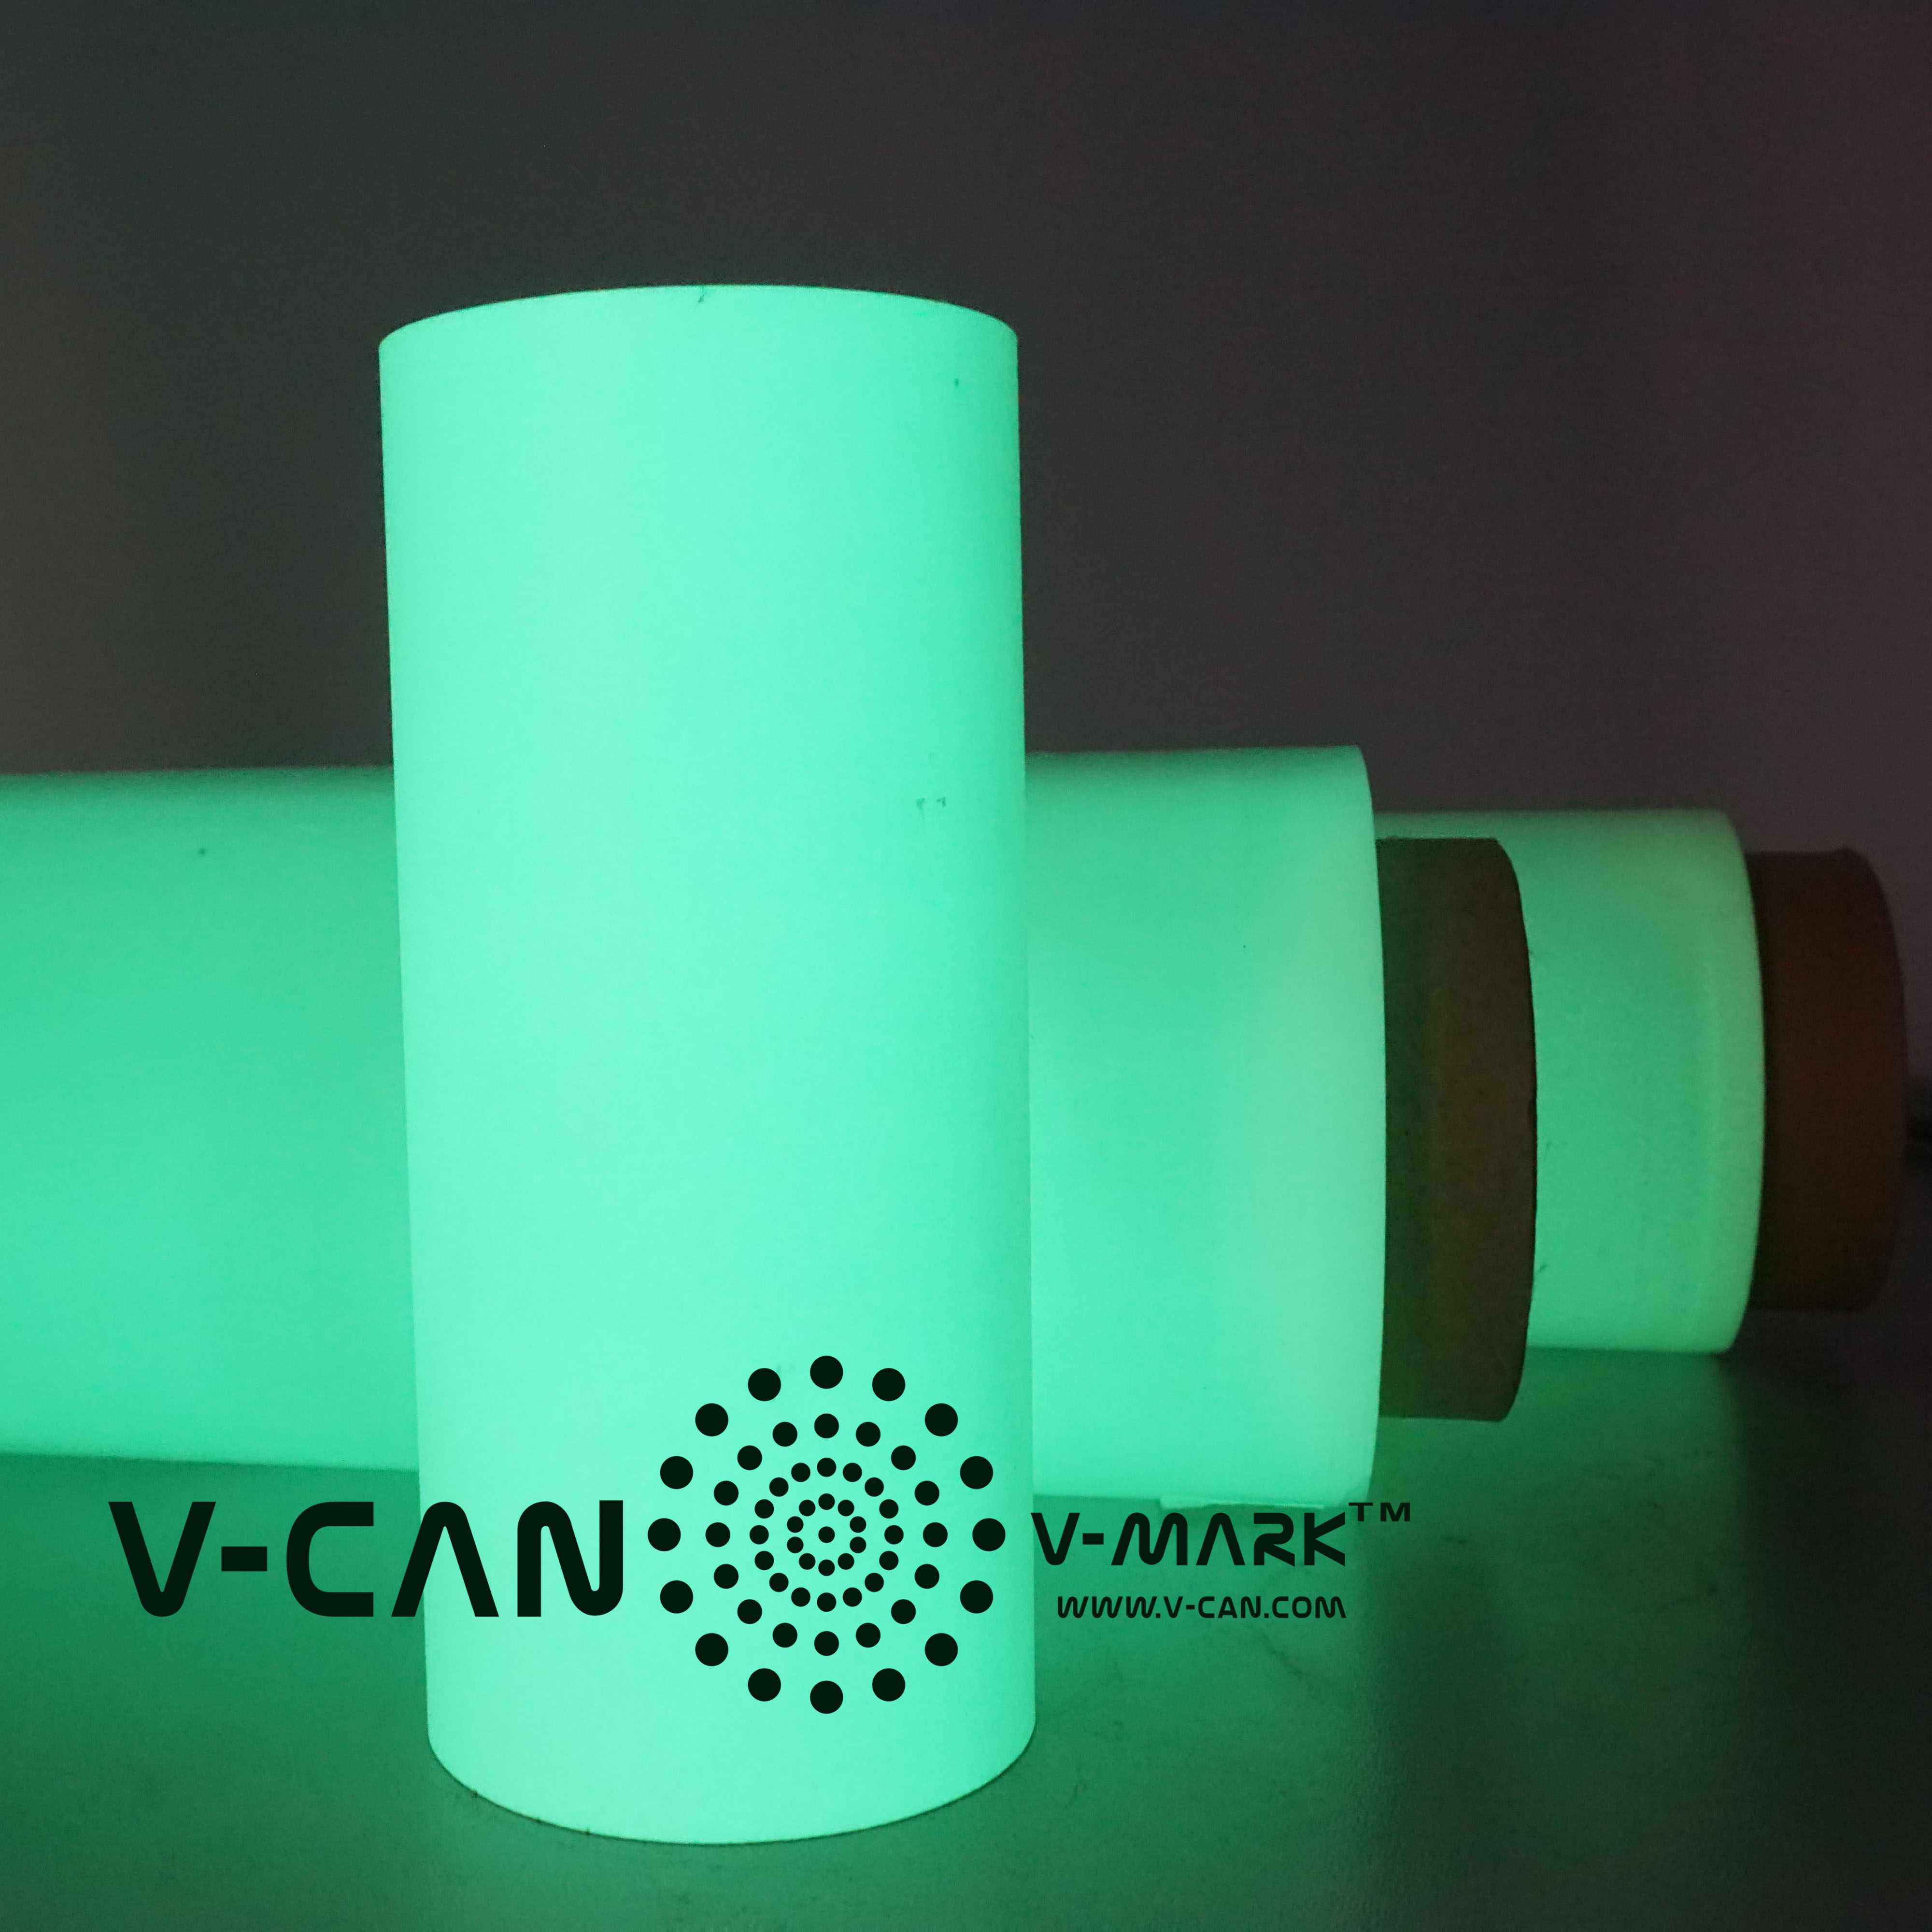 V-CAN Attending the 125th Canton Fair- Glow in the Dark Film